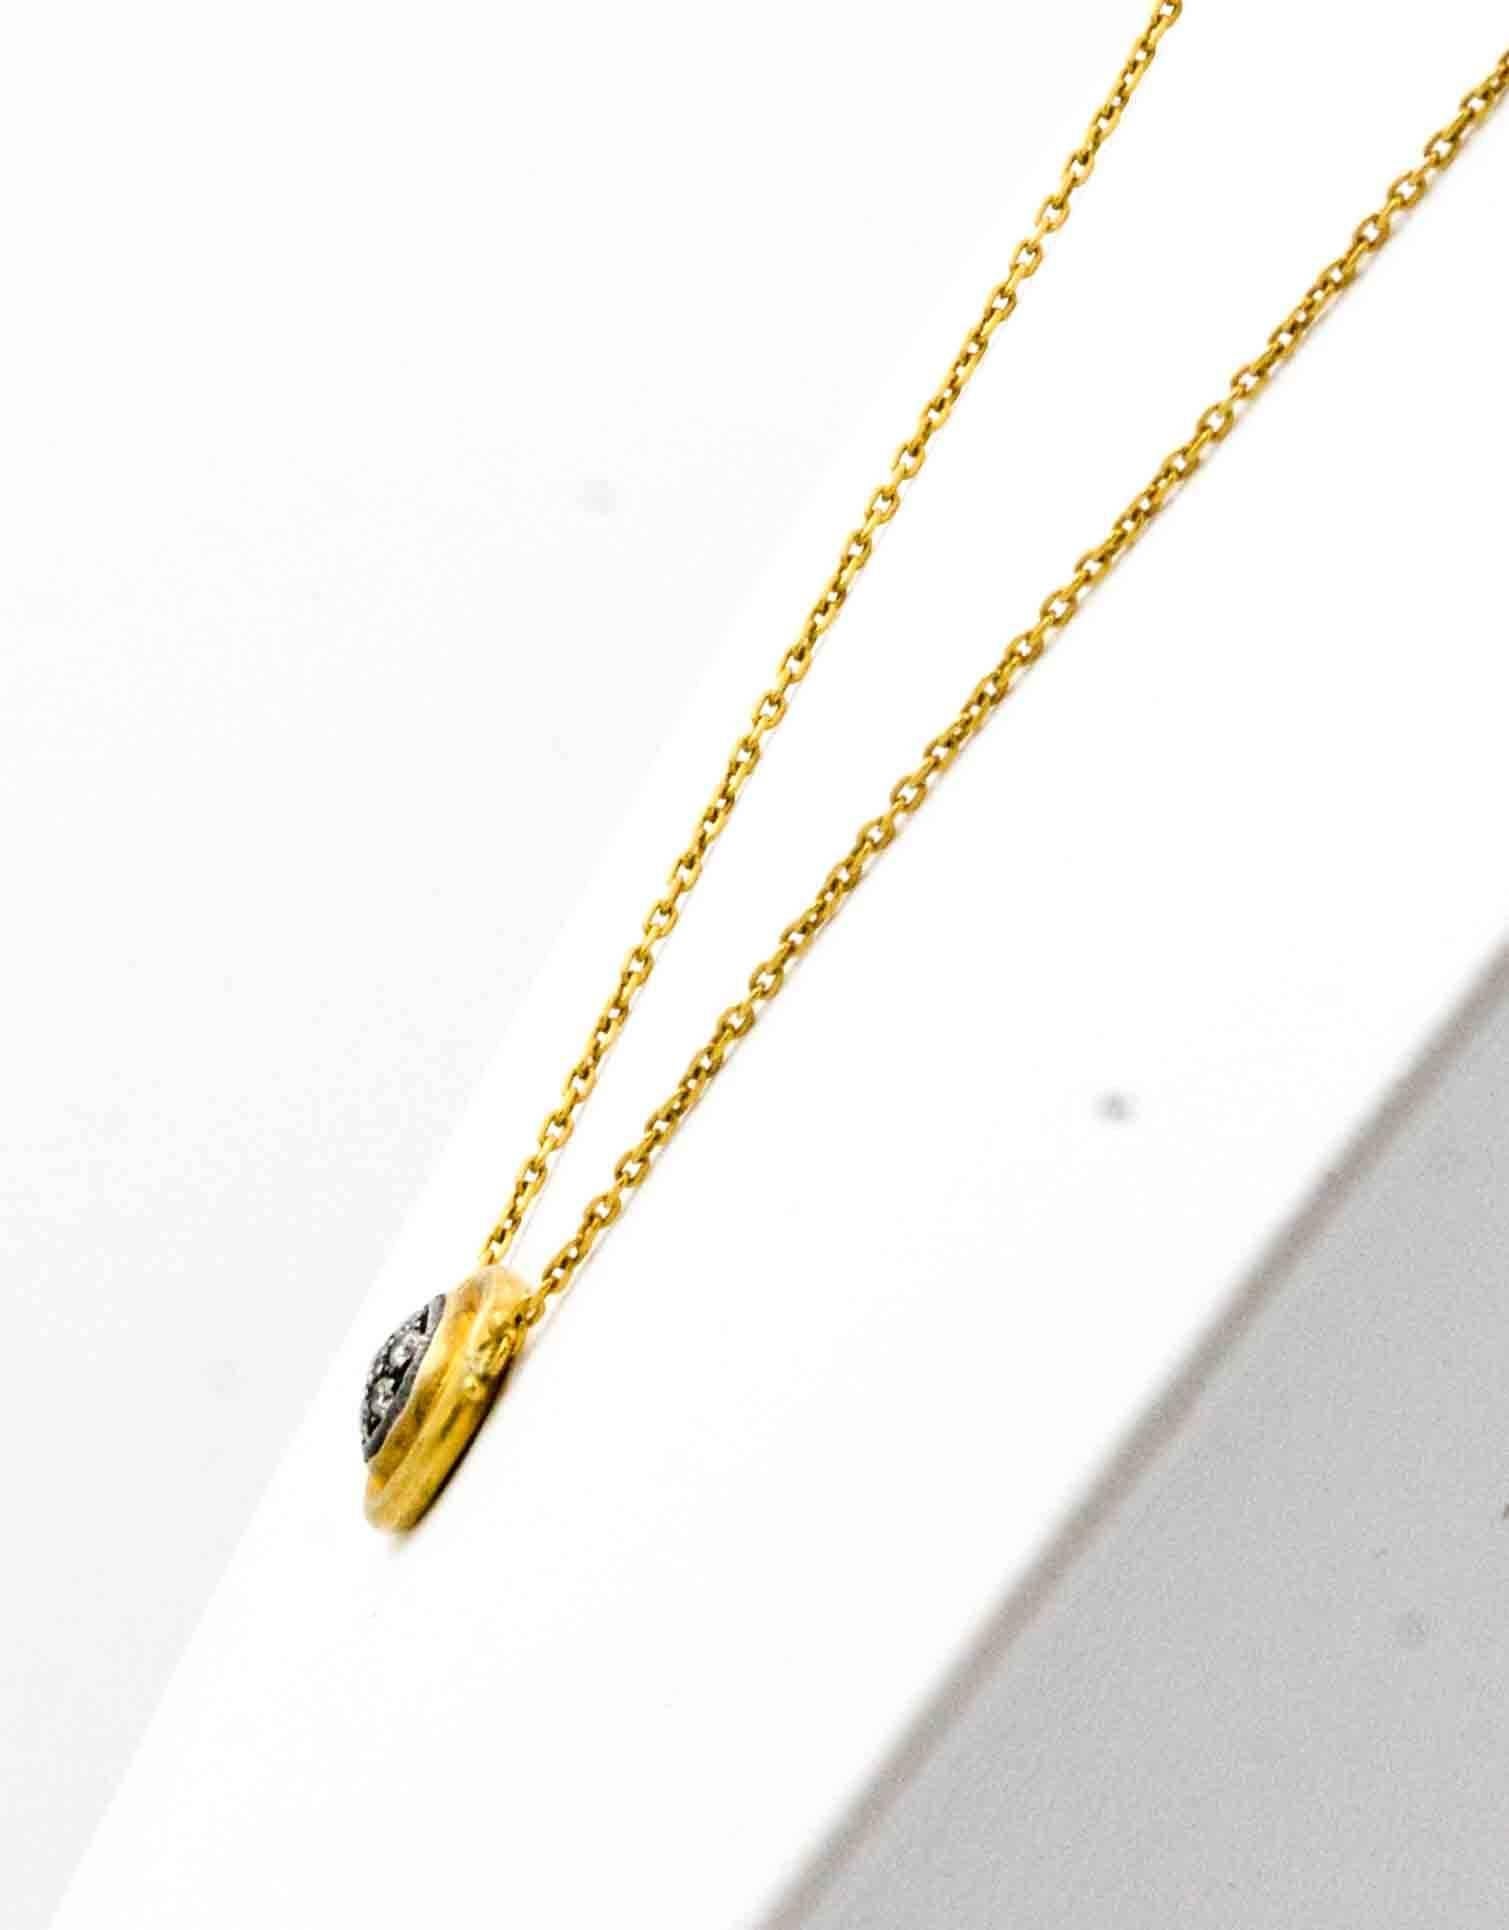 Round Cut Lika Beha 24 K Yellow Gold Necklace with Sterling Silver, 0.24 Carat Diamonds